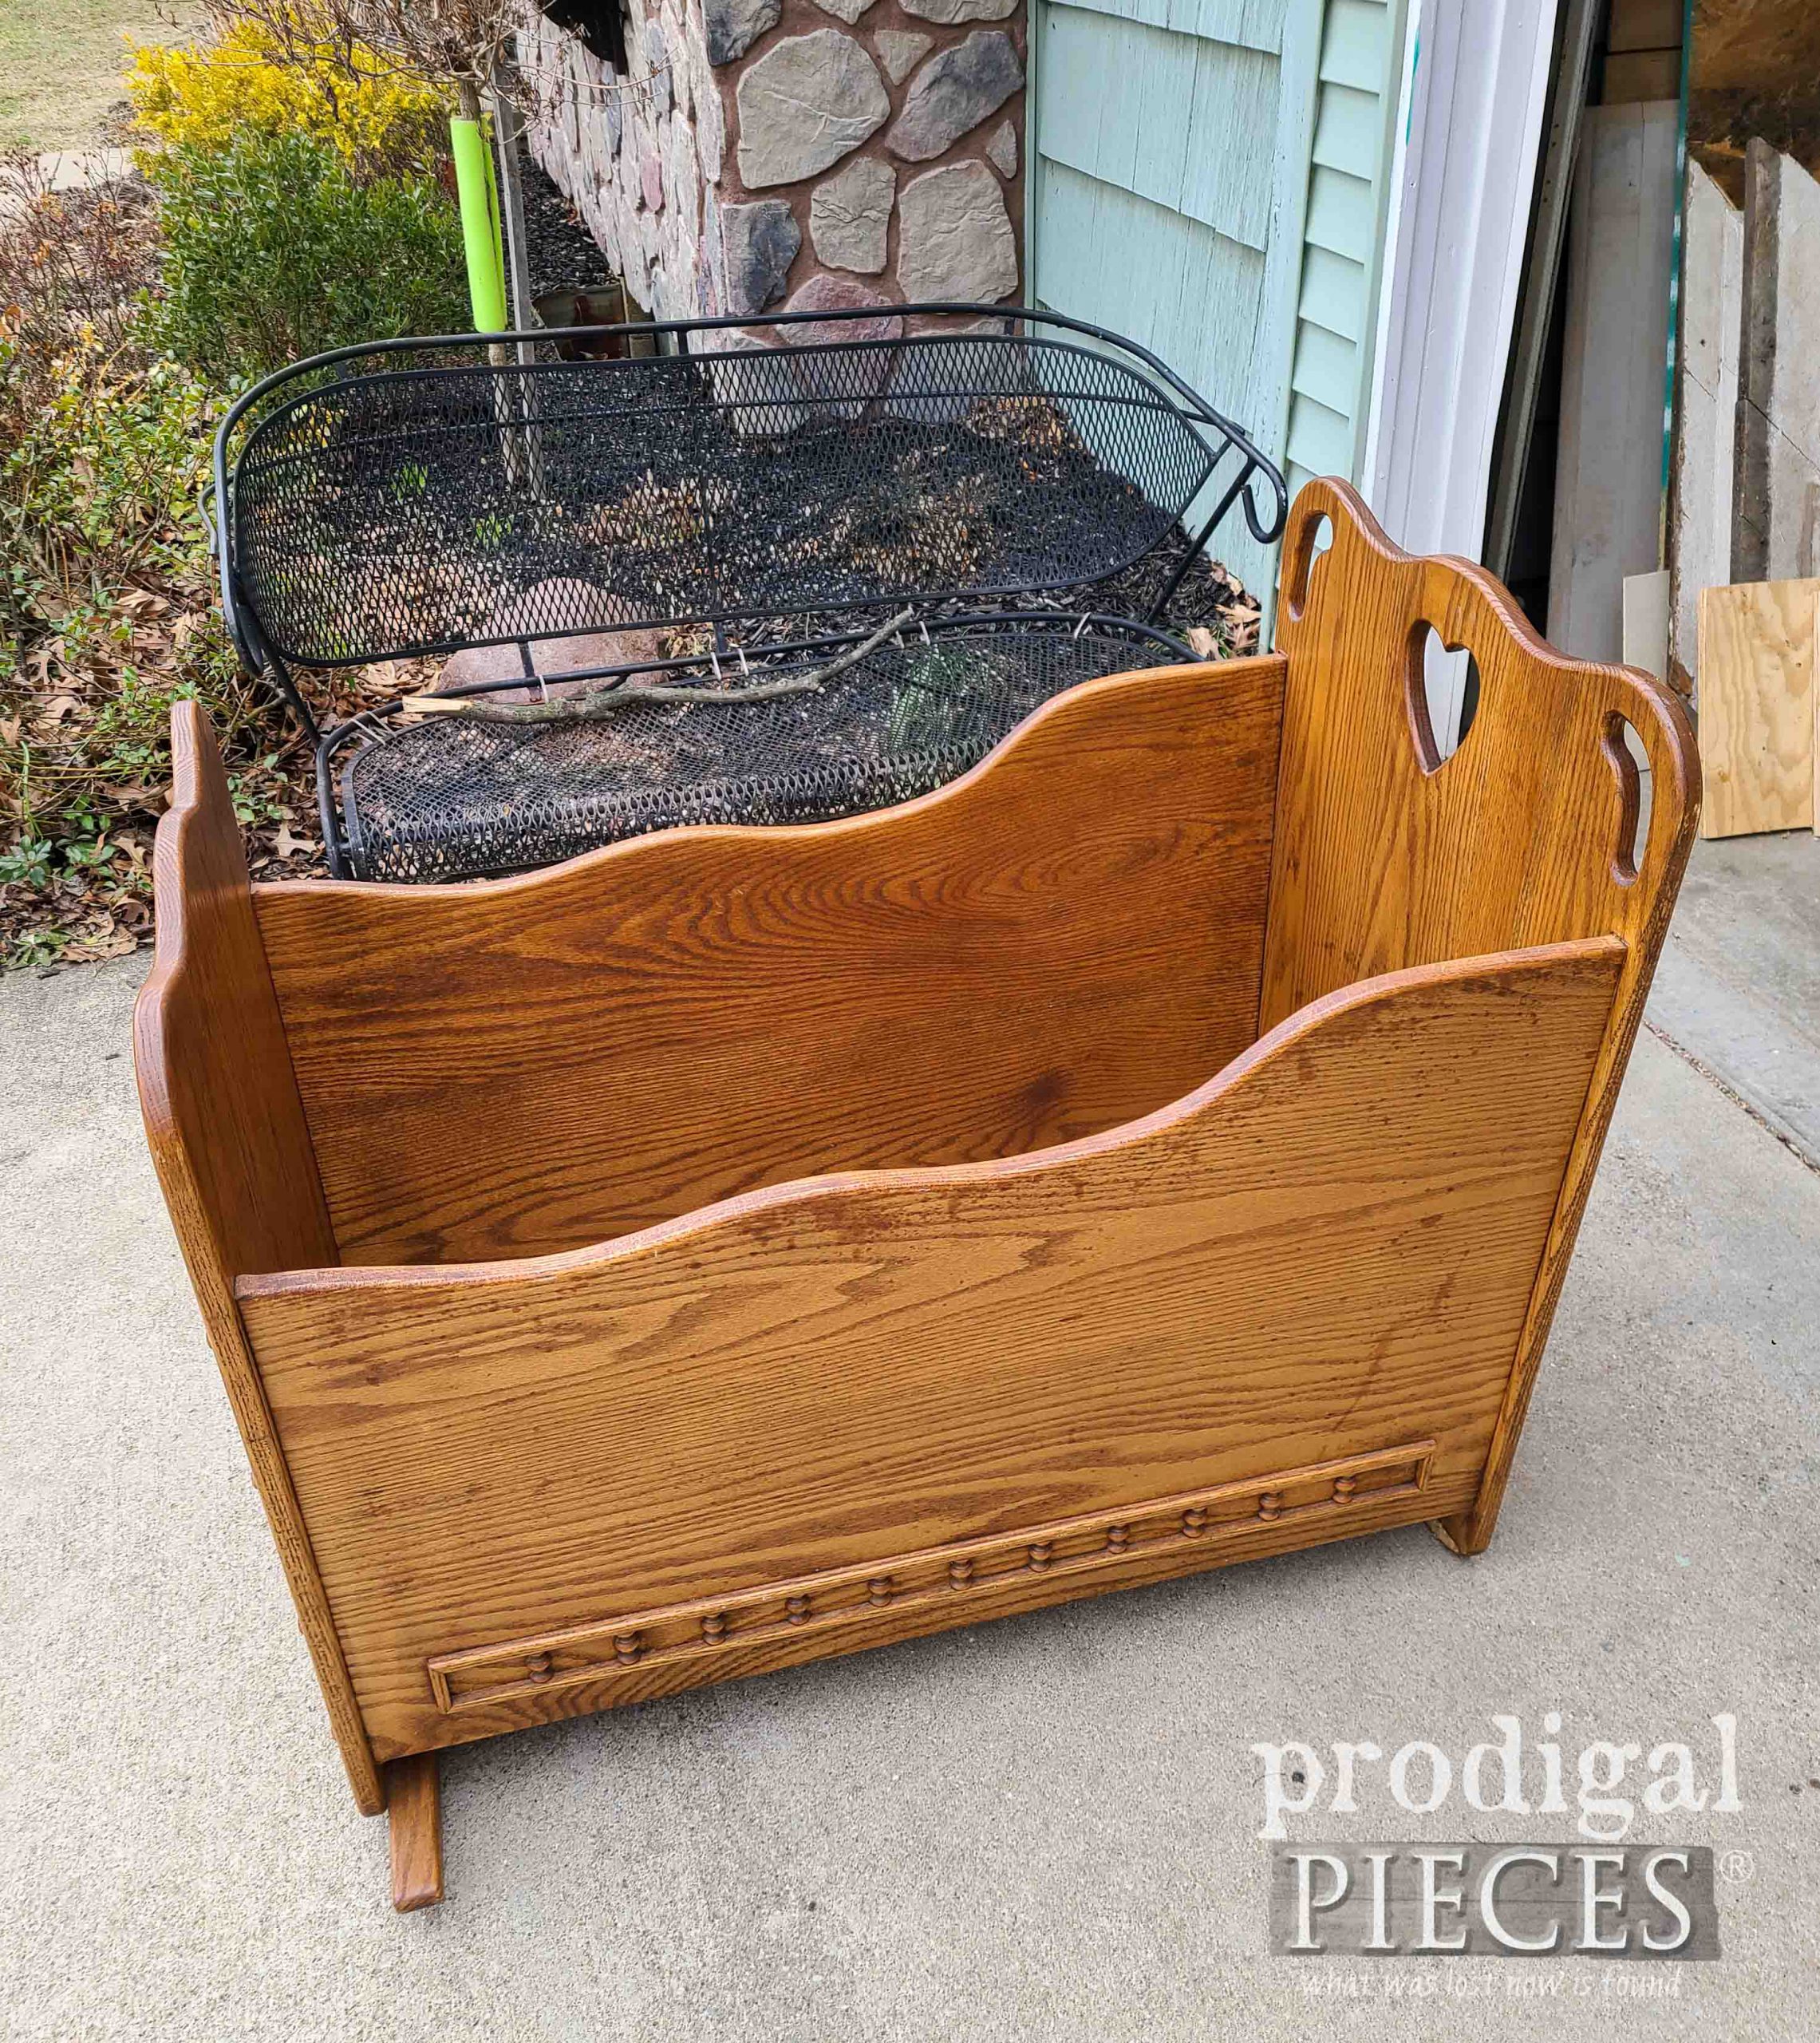 Broken Wooden Cradle Before Upcycle by Larissa of Prodigal Pieces | prodigalpieces.com